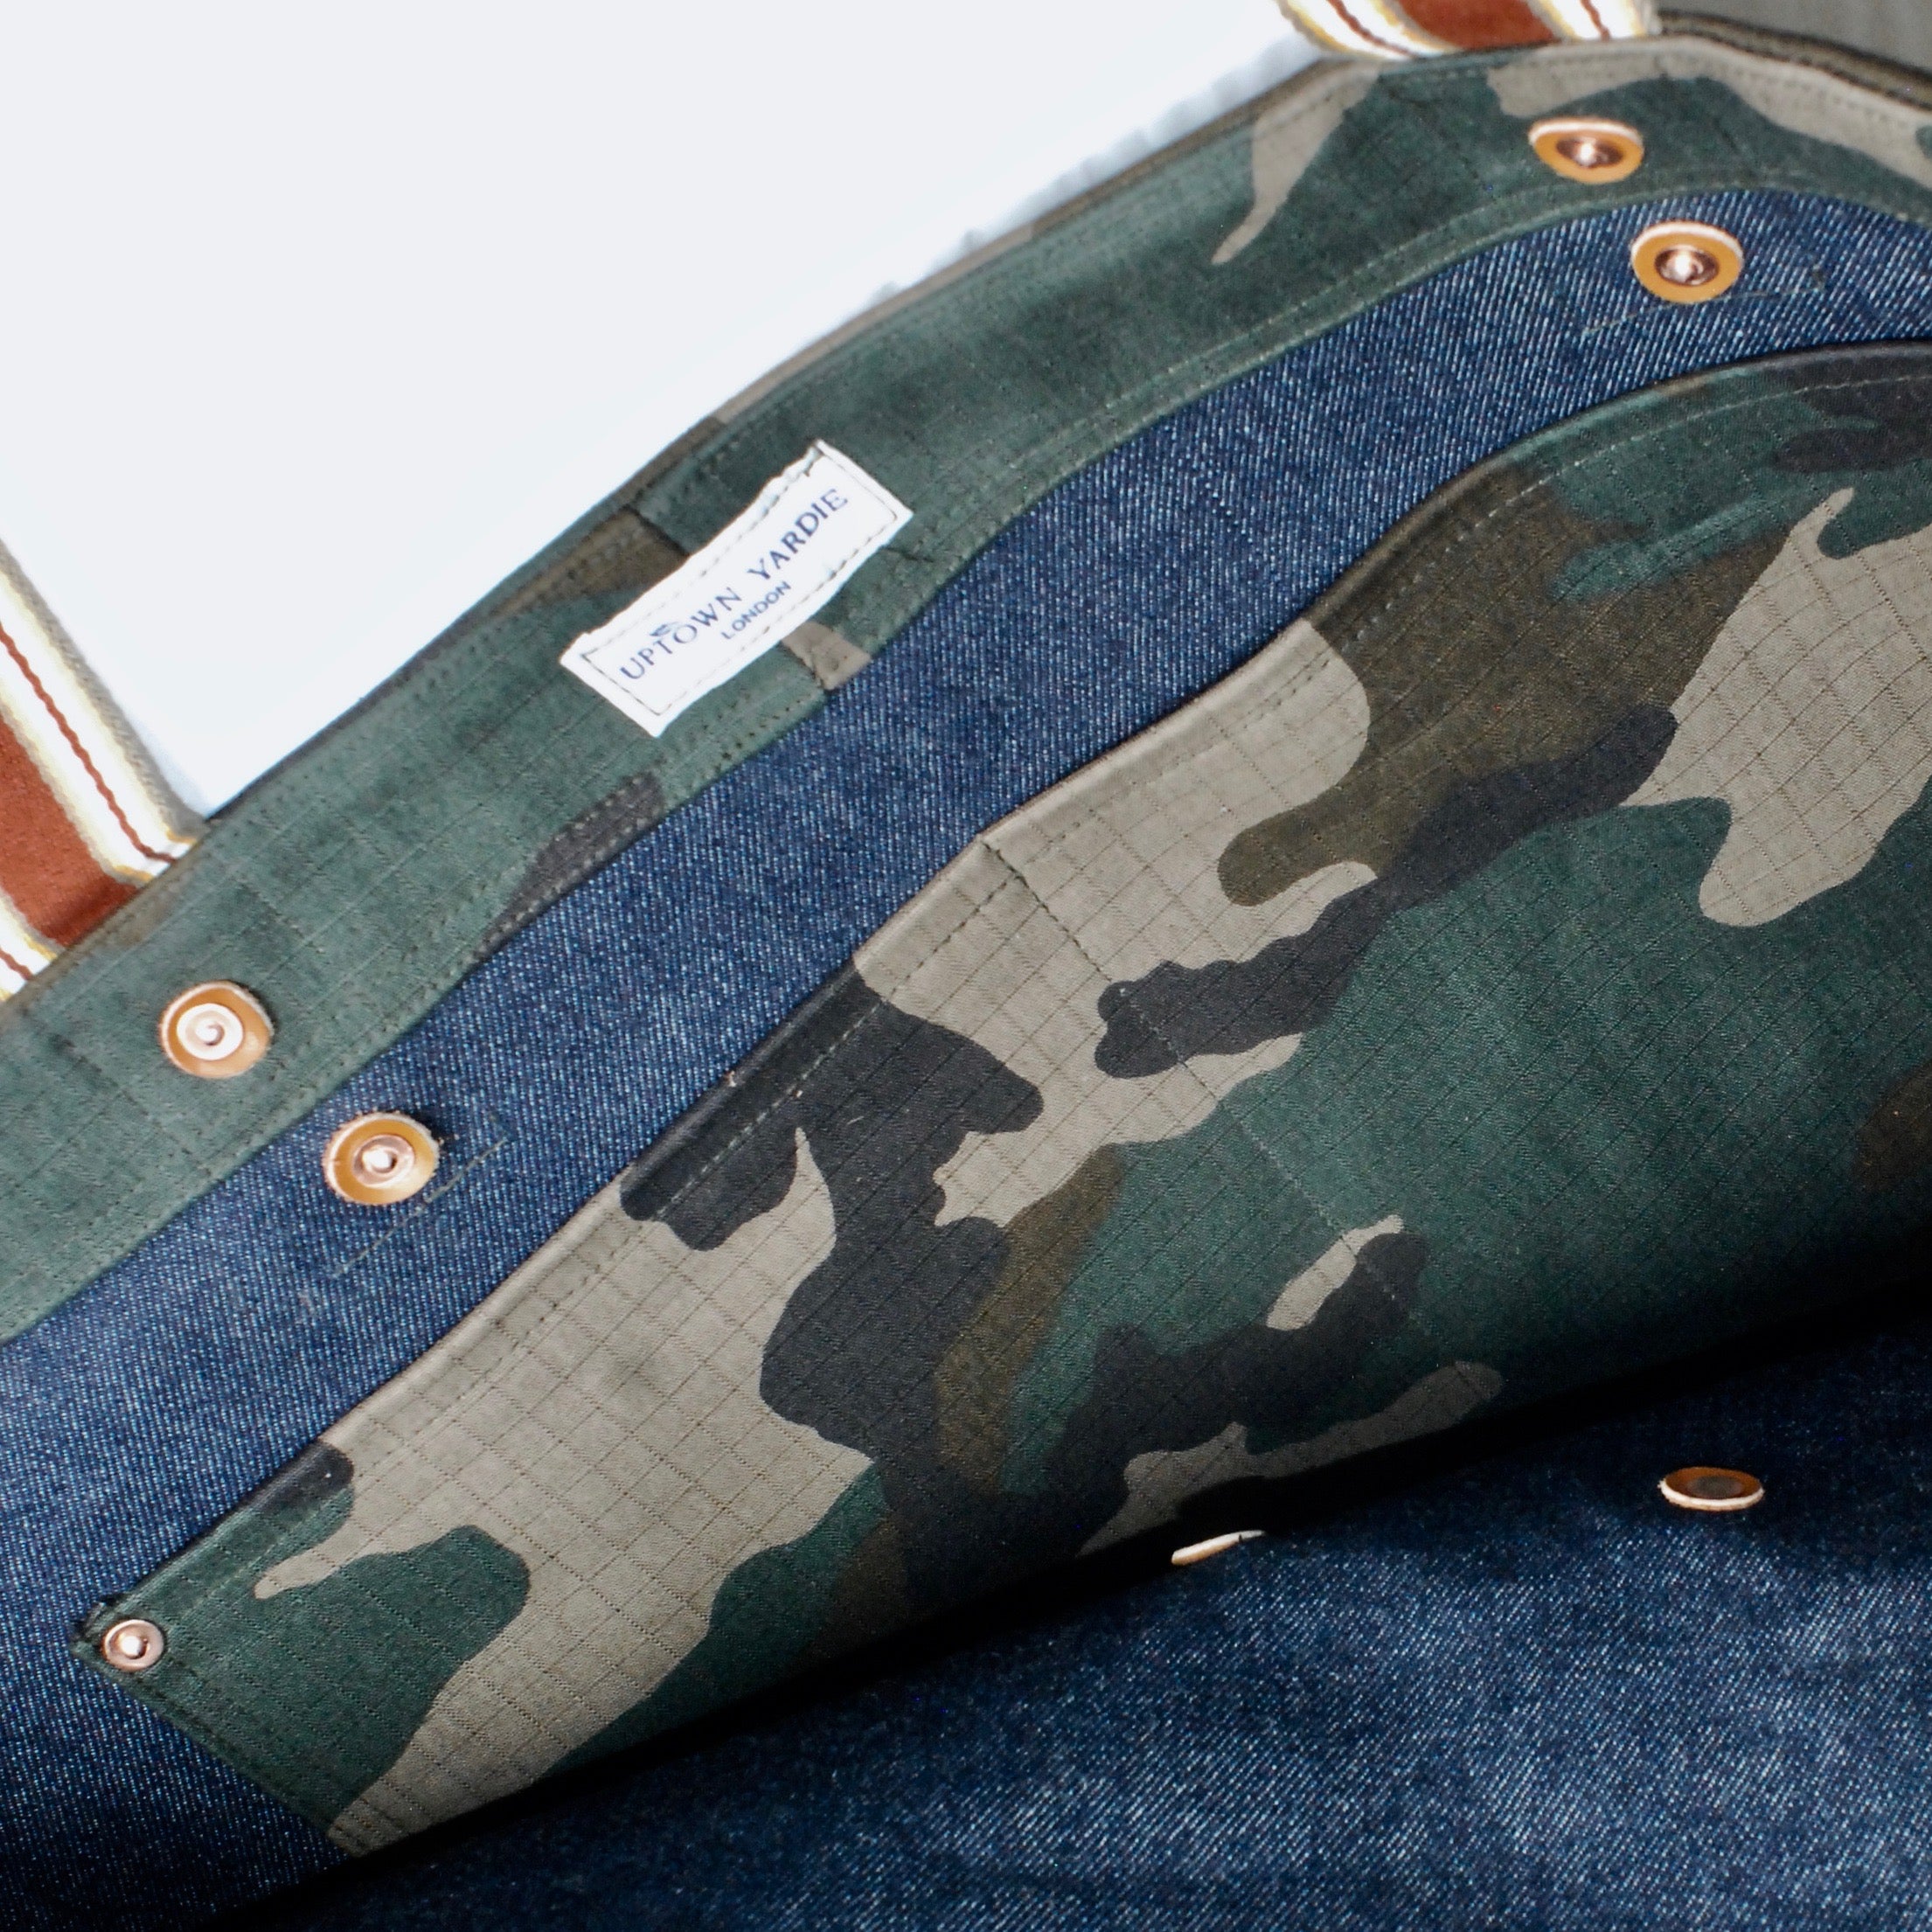 Scandal Tote Bag (Camouflage and Denim)